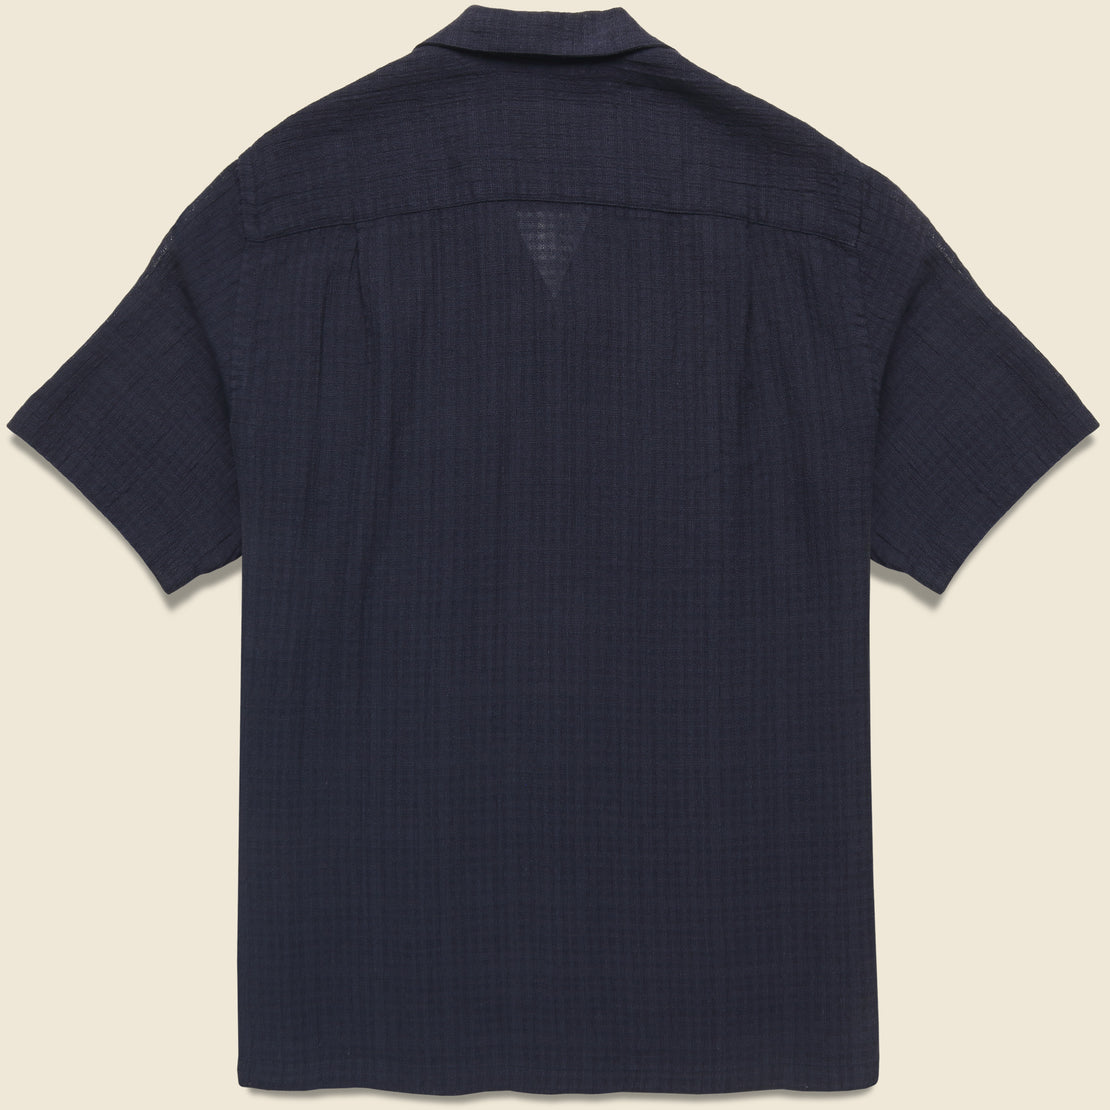 Grain Camp Shirt - Navy - Portuguese Flannel - STAG Provisions - Tops - S/S Woven - Solid